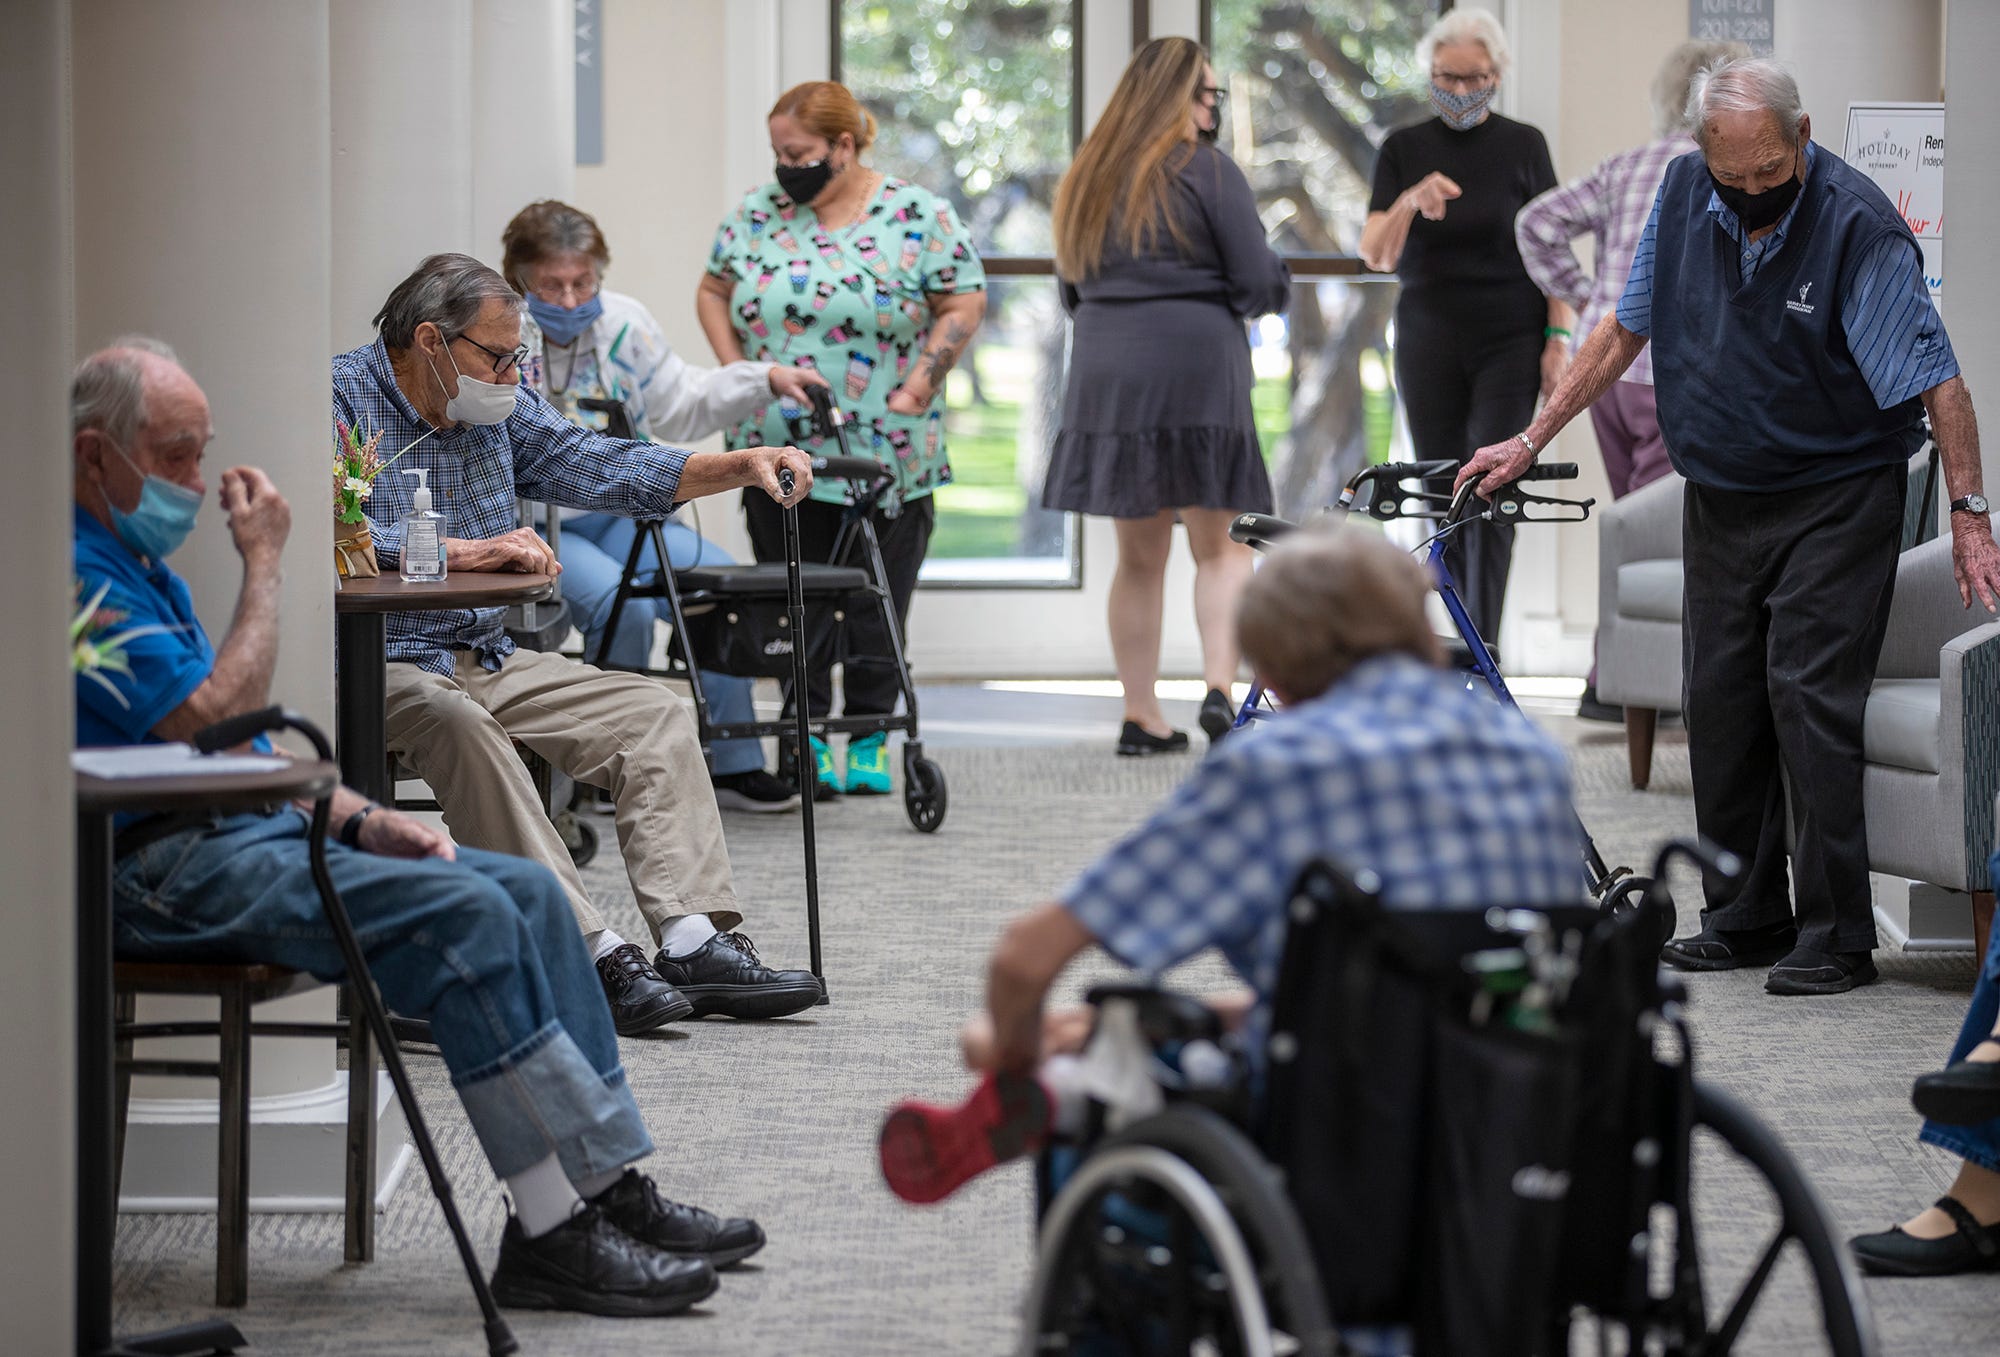 A long line of residents waits to receive the Pfizer-BioNtech COVID-19 vaccine at the Renaissance-Austin senior living facility in north Austin on Friday, January 15, 2021. This facility is among the first long-term care facilities to receive Pfizer-BioNtech COVID-19 vaccines in the Austin area.